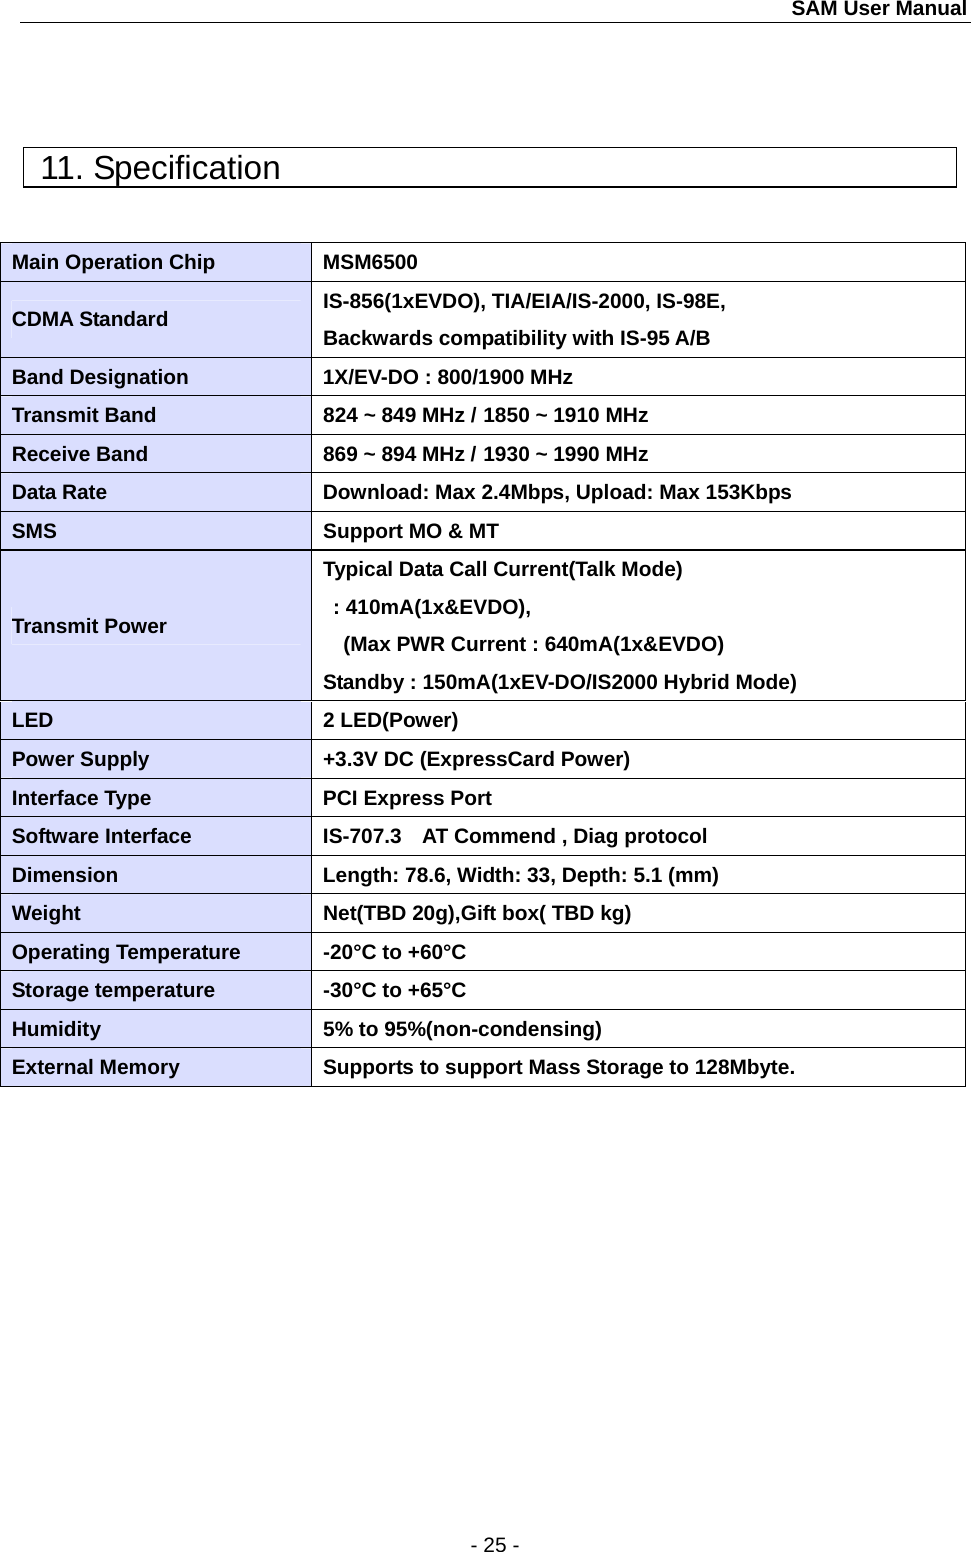 SAM User Manual  - 25 -    11. Specification           Main Operation Chip  MSM6500 CDMA Standard  IS-856(1xEVDO), TIA/EIA/IS-2000, IS-98E,   Backwards compatibility with IS-95 A/B Band Designation  1X/EV-DO : 800/1900 MHz Transmit Band  824 ~ 849 MHz / 1850 ~ 1910 MHz Receive Band  869 ~ 894 MHz / 1930 ~ 1990 MHz Data Rate  Download: Max 2.4Mbps, Upload: Max 153Kbps SMS  Support MO &amp; MT Transmit Power Typical Data Call Current(Talk Mode)    : 410mA(1x&amp;EVDO), (Max PWR Current : 640mA(1x&amp;EVDO) Standby : 150mA(1xEV-DO/IS2000 Hybrid Mode) LED 2 LED(Power) Power Supply  +3.3V DC (ExpressCard Power) Interface Type  PCI Express Port Software Interface  IS-707.3    AT Commend , Diag protocol Dimension  Length: 78.6, Width: 33, Depth: 5.1 (mm) Weight  Net(TBD 20g),Gift box( TBD kg) Operating Temperature  -20°C to +60°C Storage temperature  -30°C to +65°C Humidity  5% to 95%(non-condensing) External Memory  Supports to support Mass Storage to 128Mbyte.   